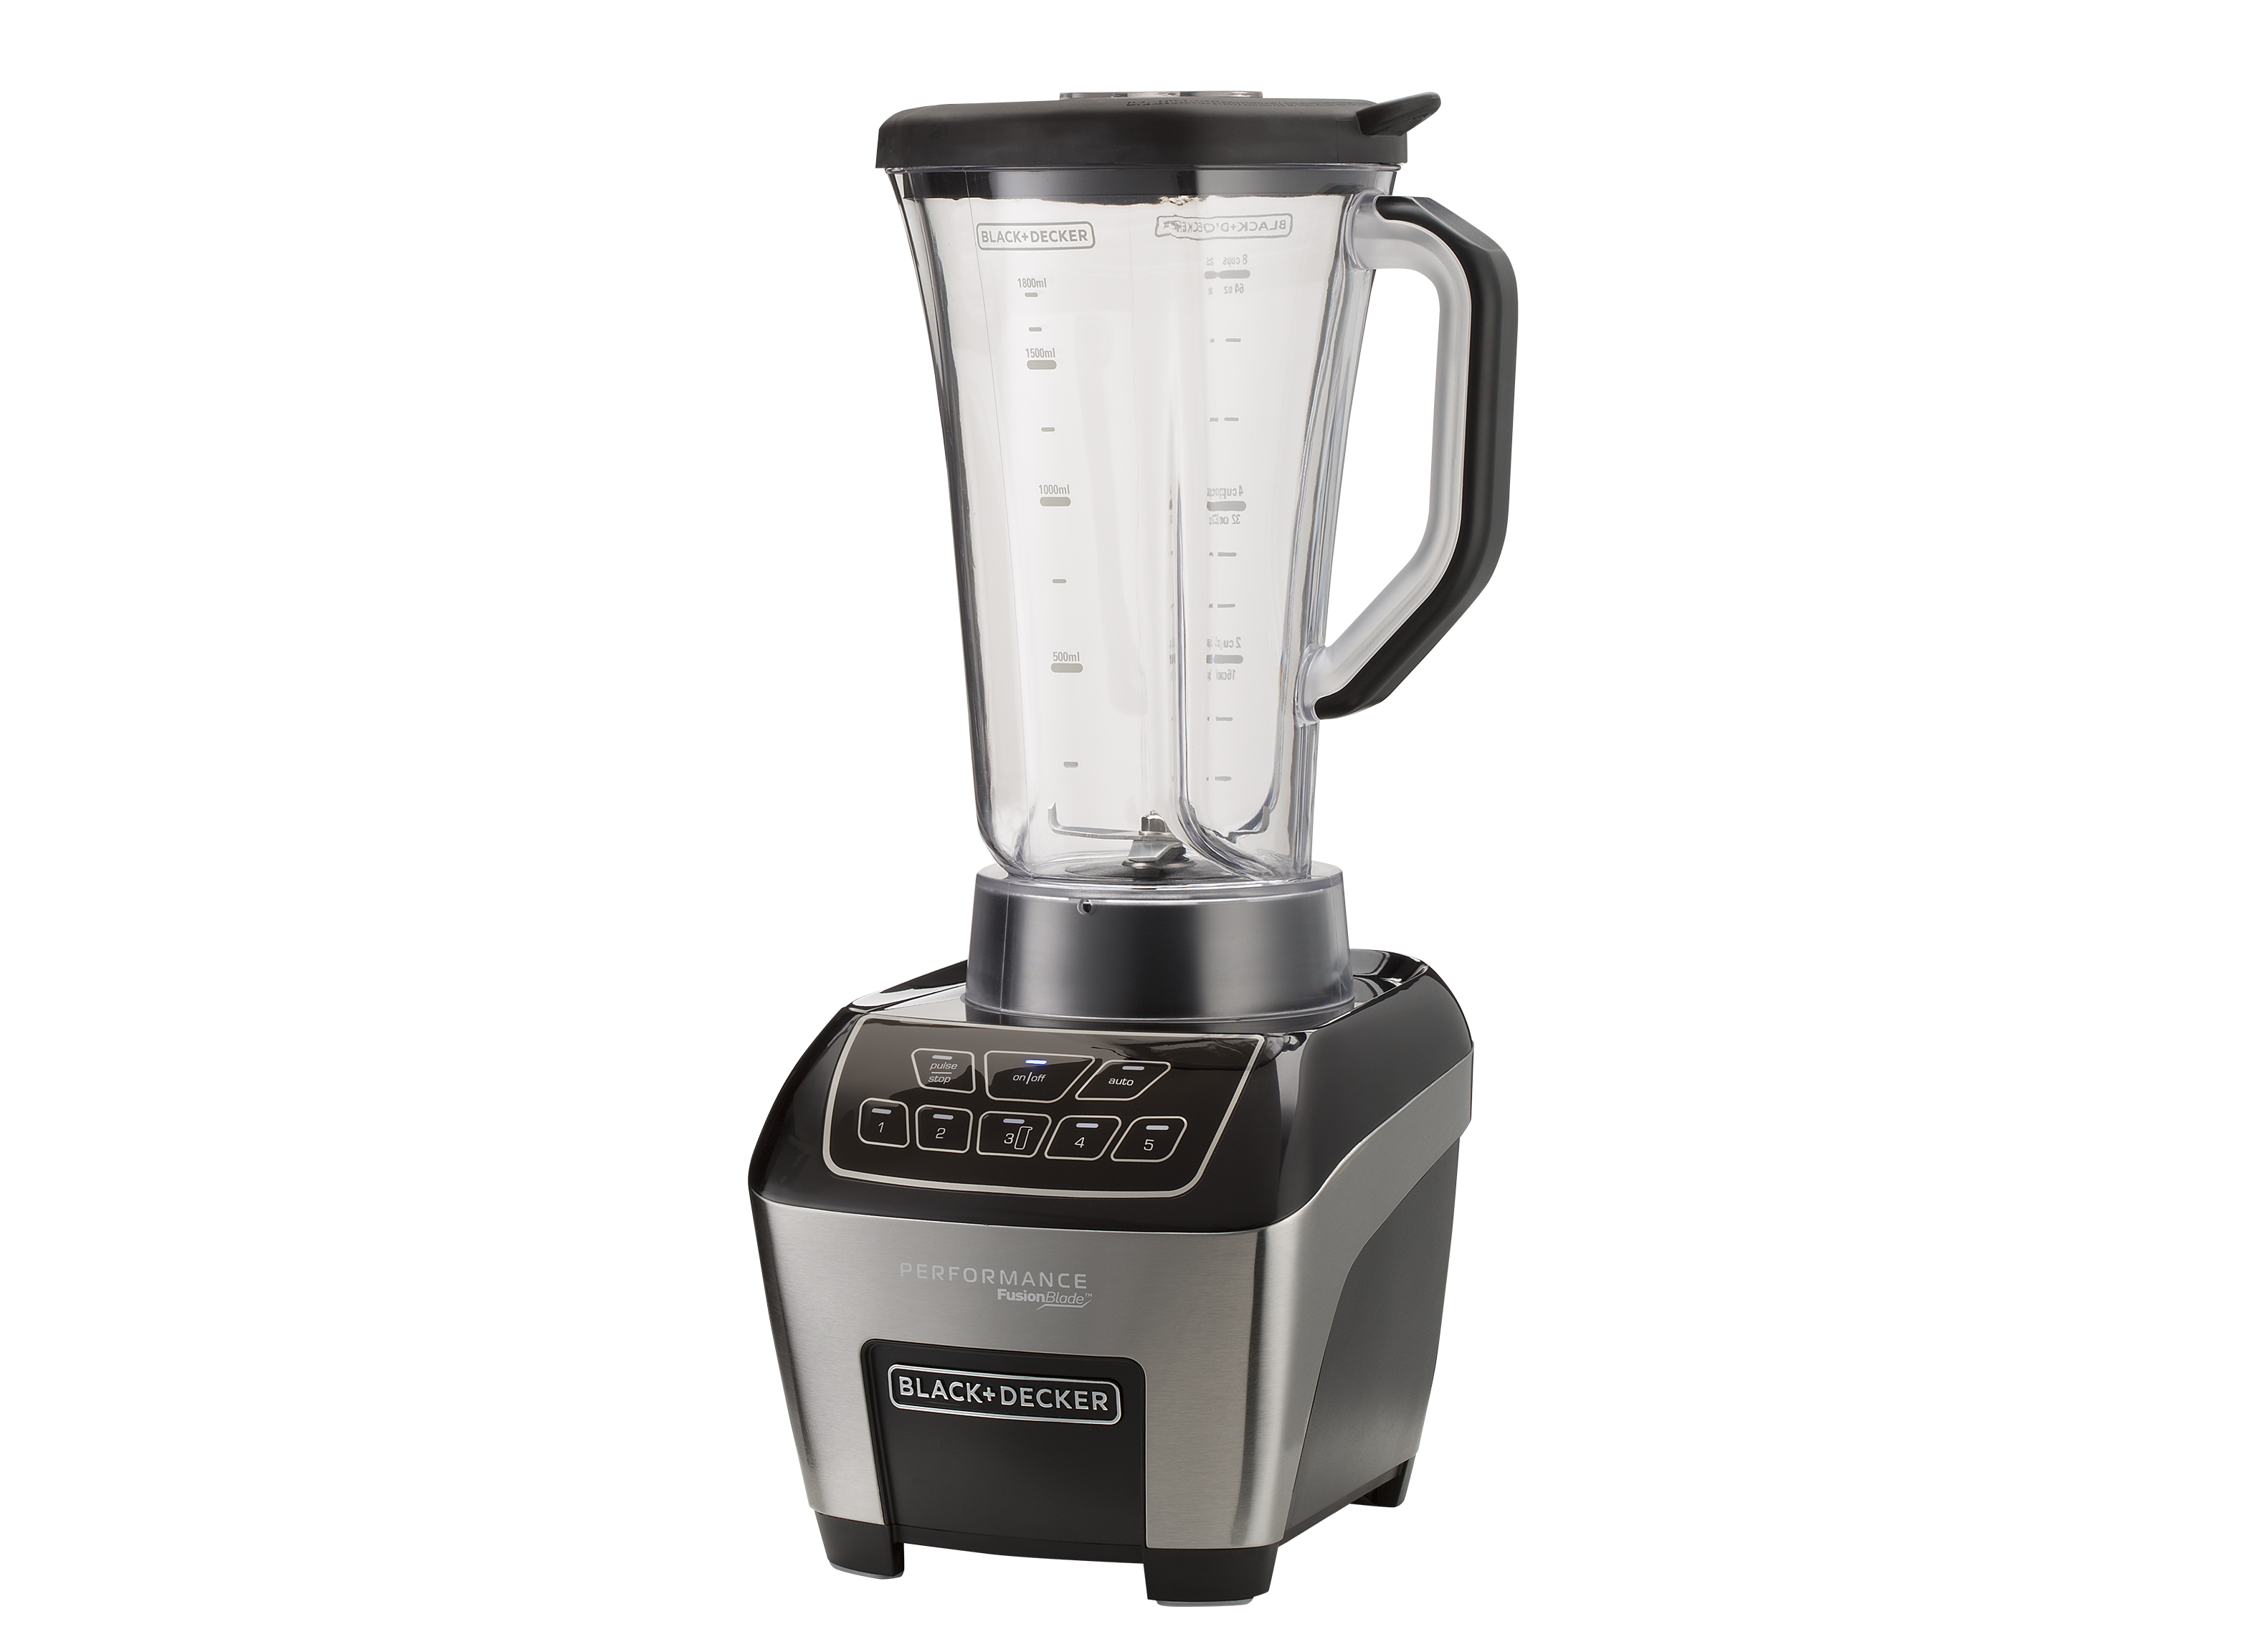 Black + Decker Performance Fusion Blade Digital Blending System #BL6010  Review, Price and Features – Pros and Cons of Black + Decker Performance Fusion  Blade Digital Blending System #BL6010